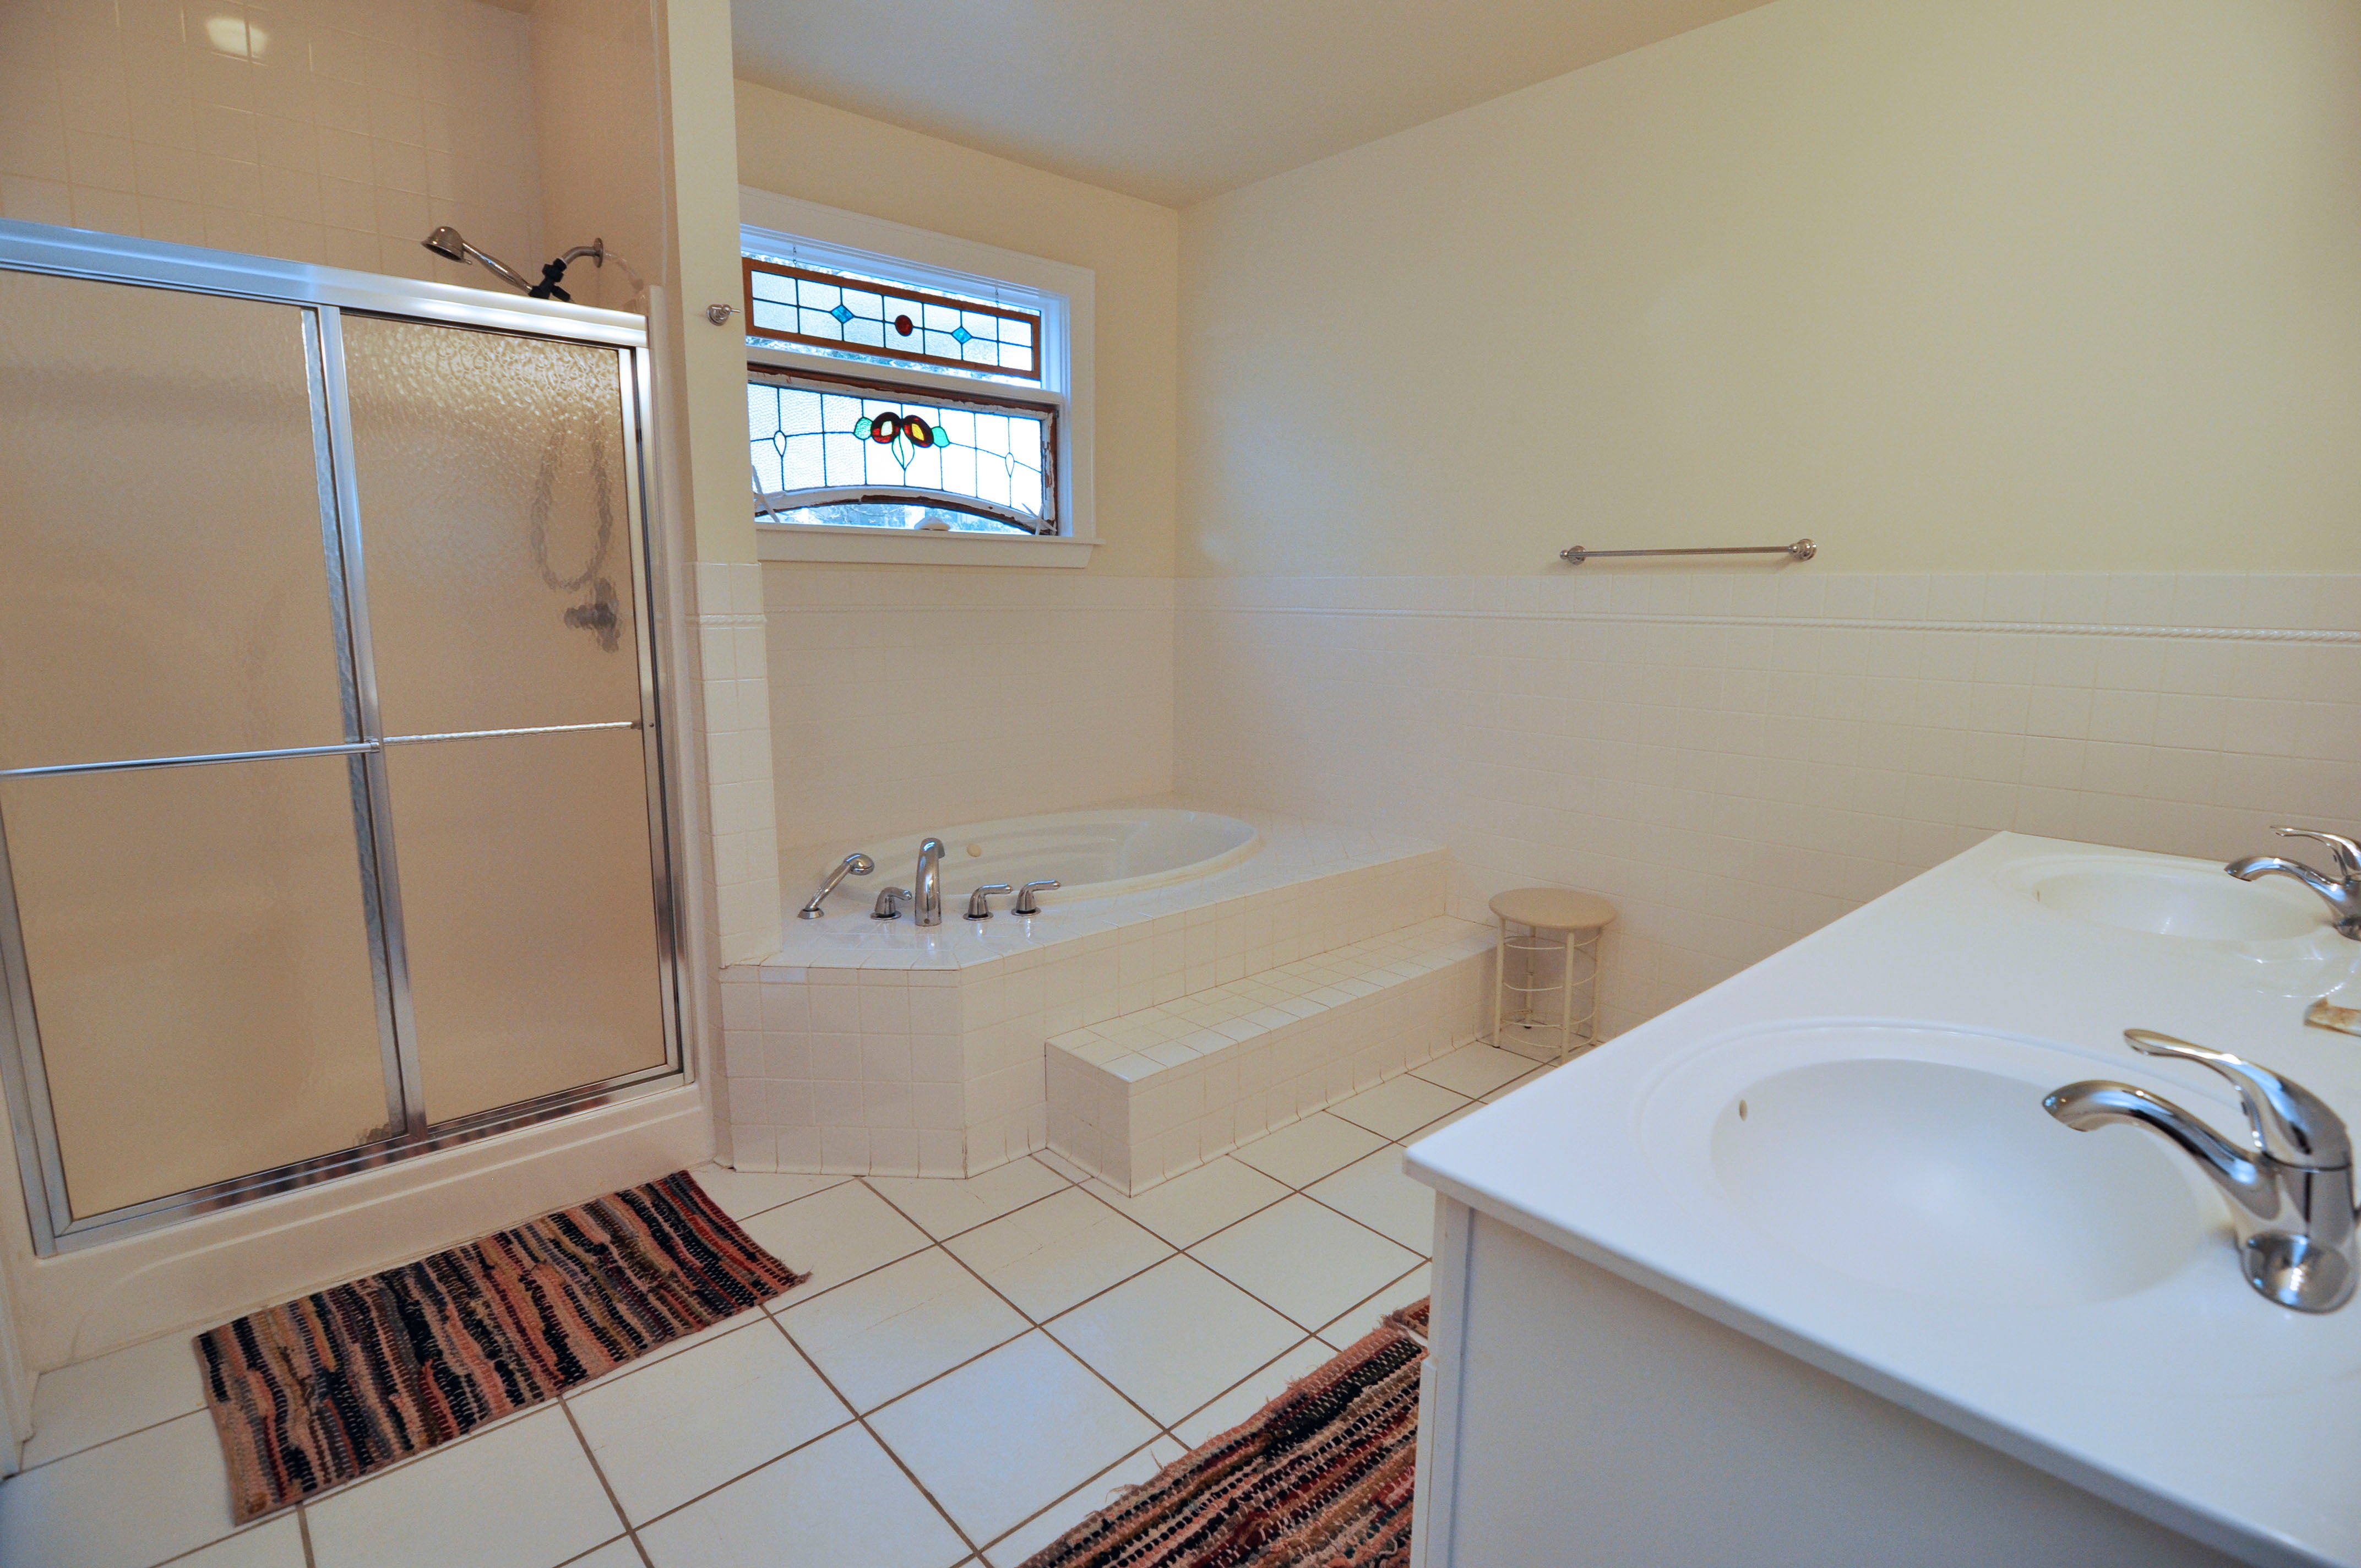 Bath will Whirlpool Tub and Separate Shower